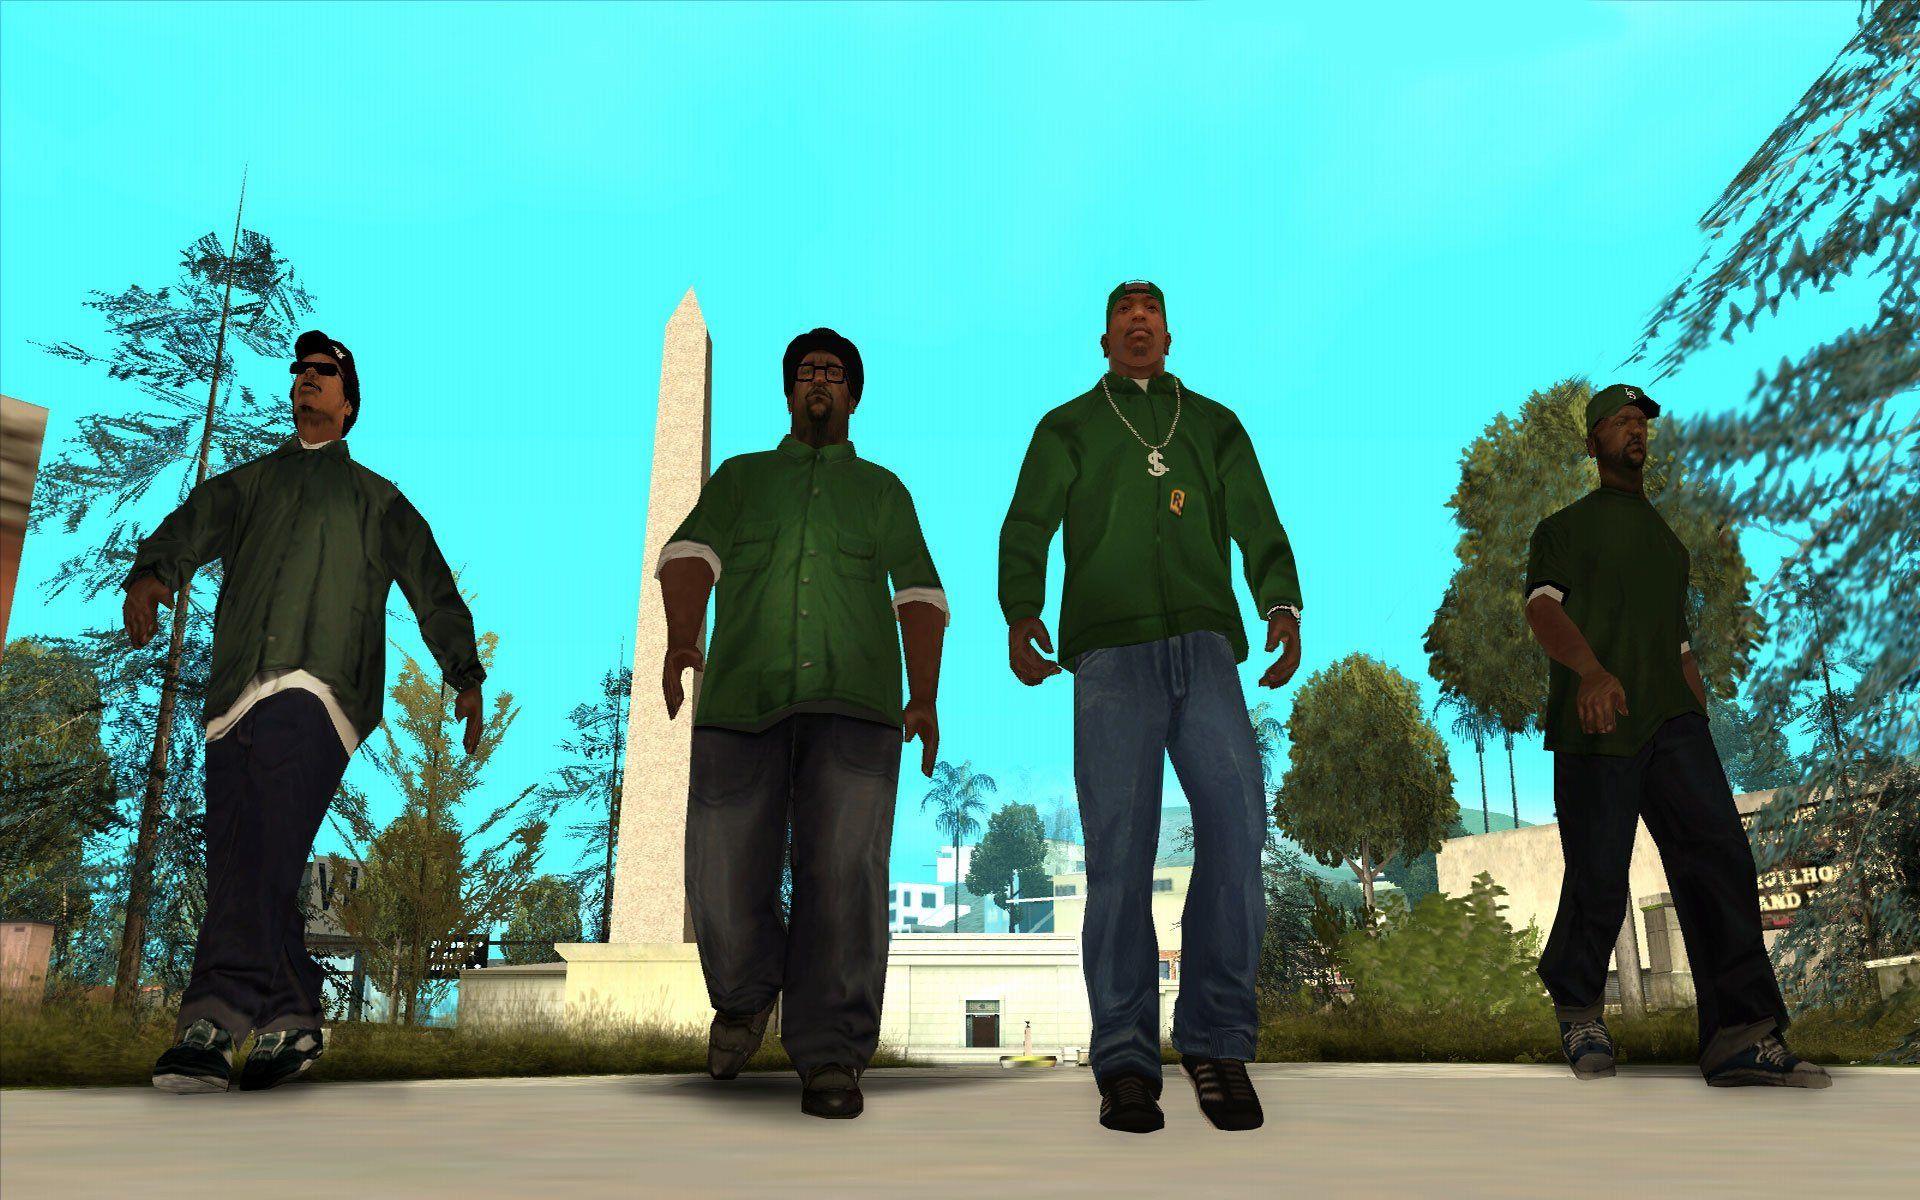 The four main characters of "San Andreas," all wearing green shirts, walk in a line.